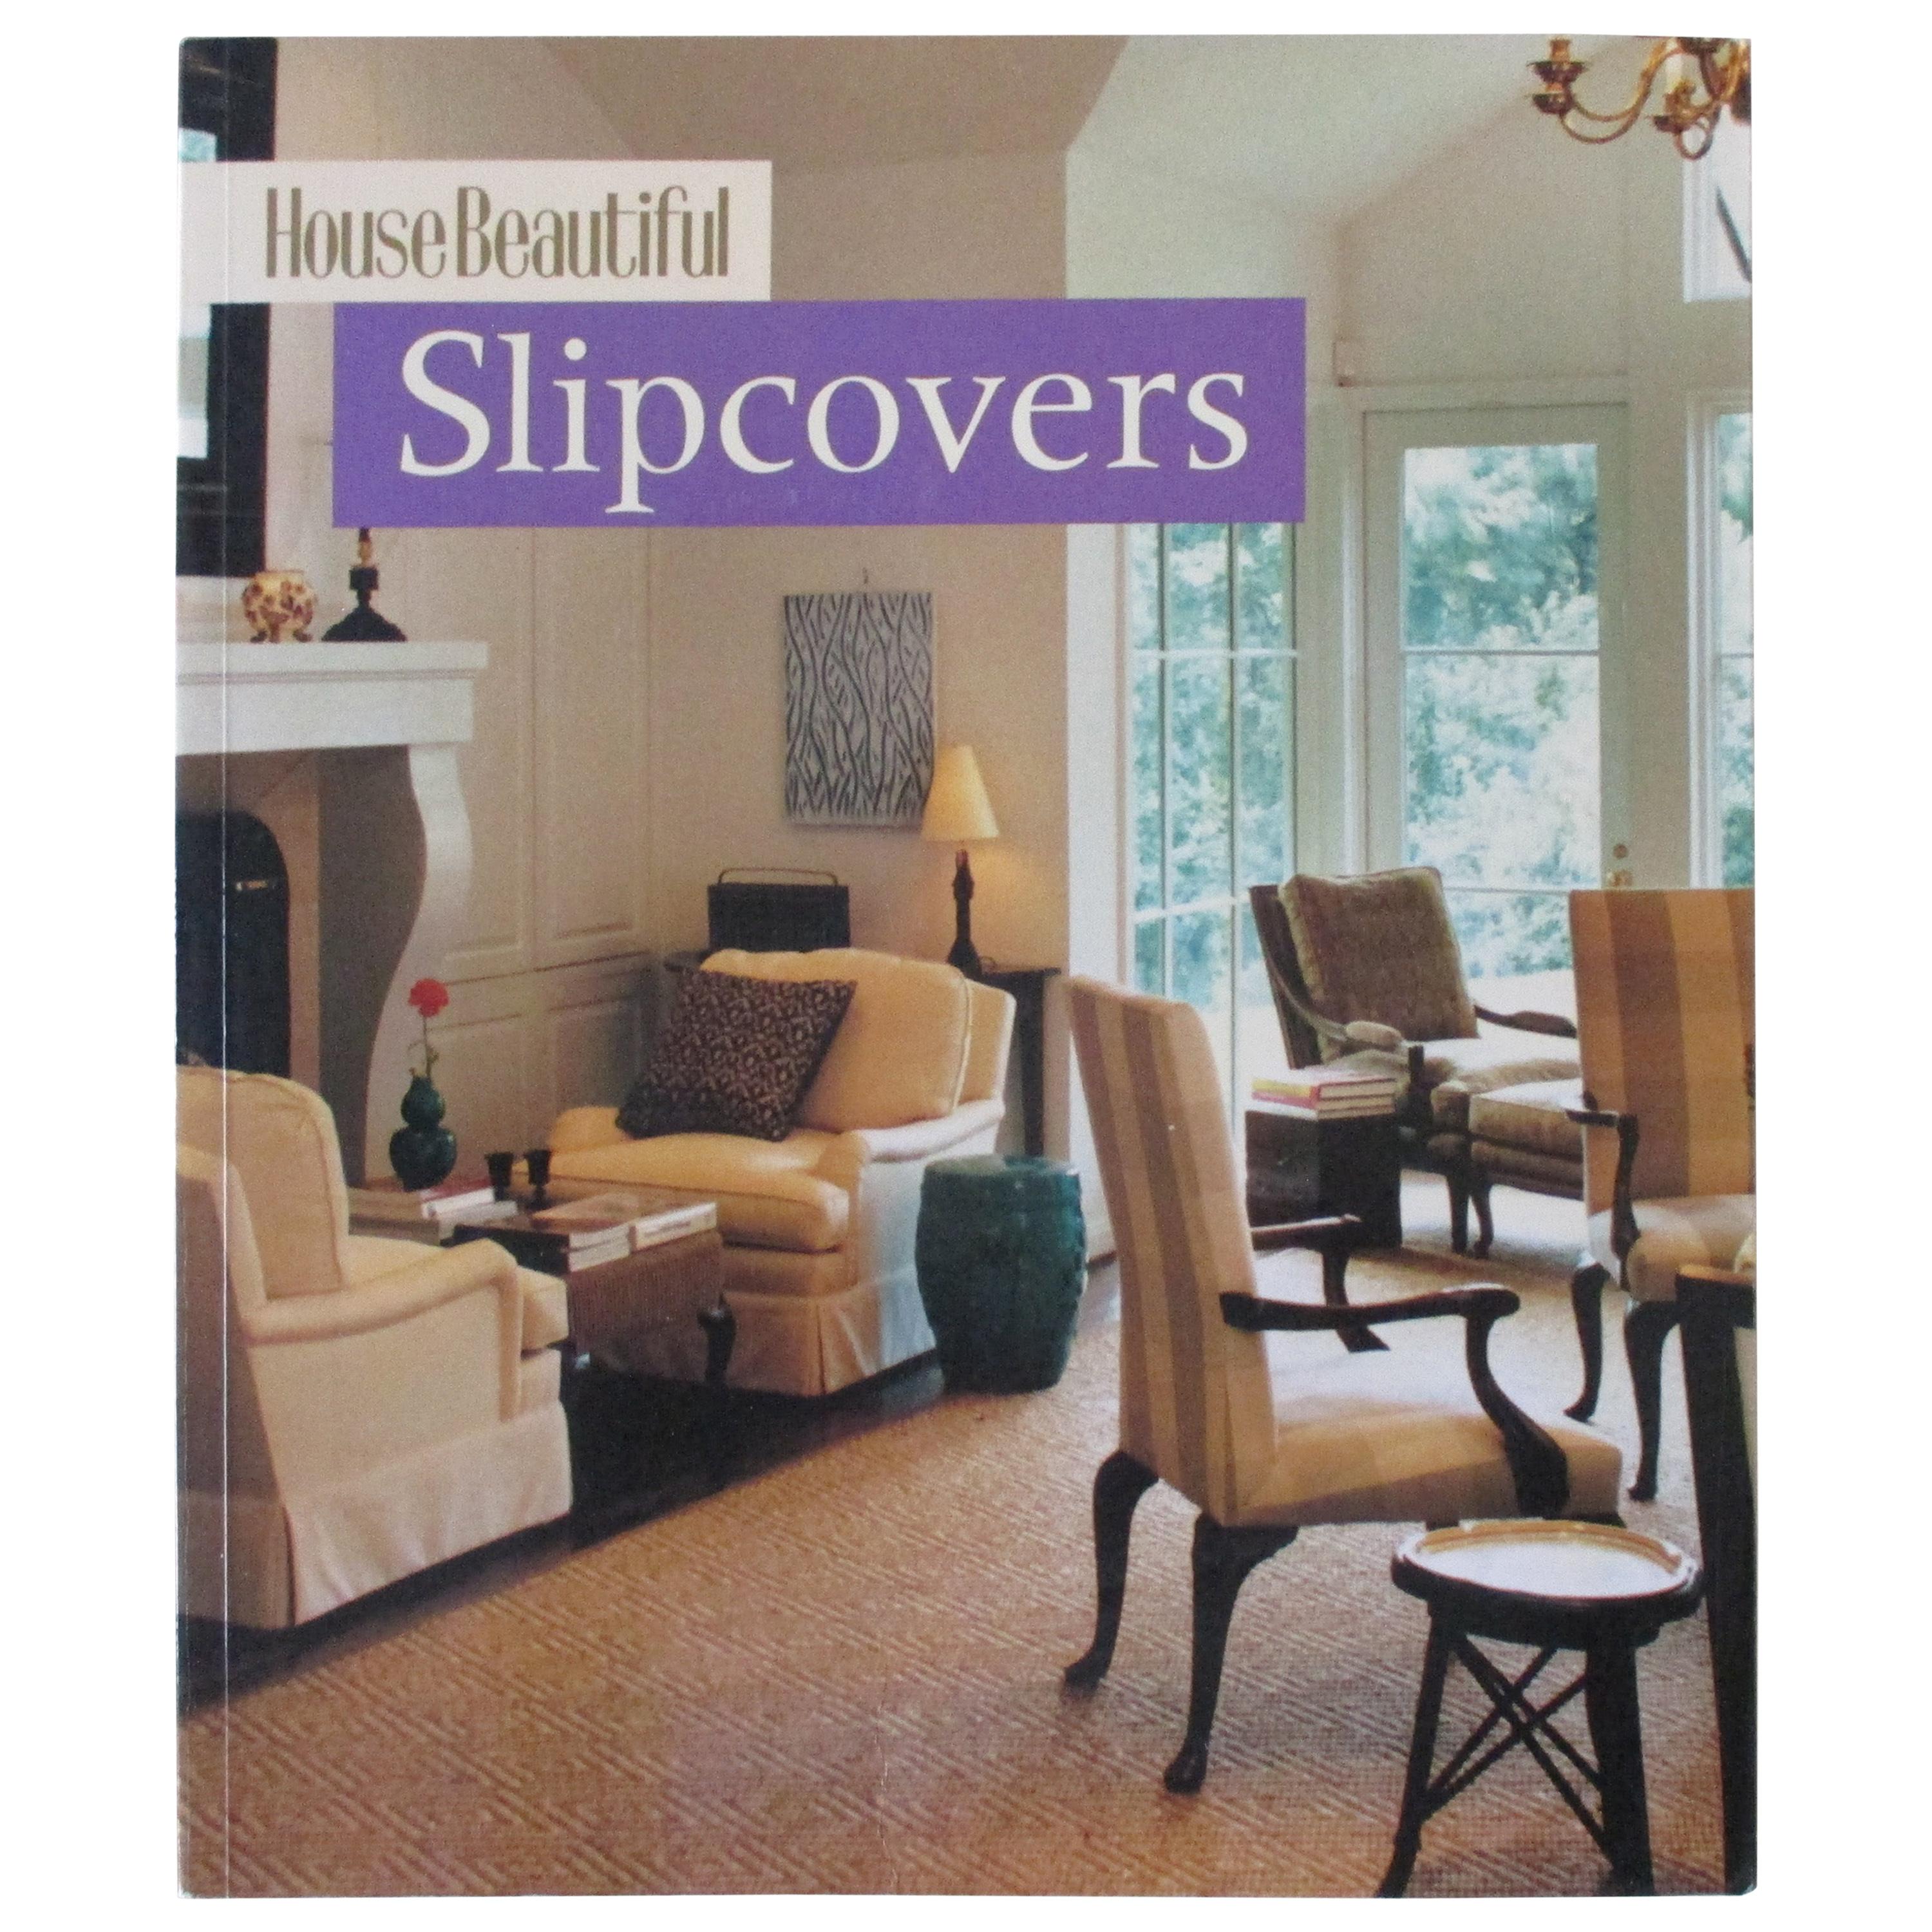 Slipcovers Softcover Book by House Beautiful